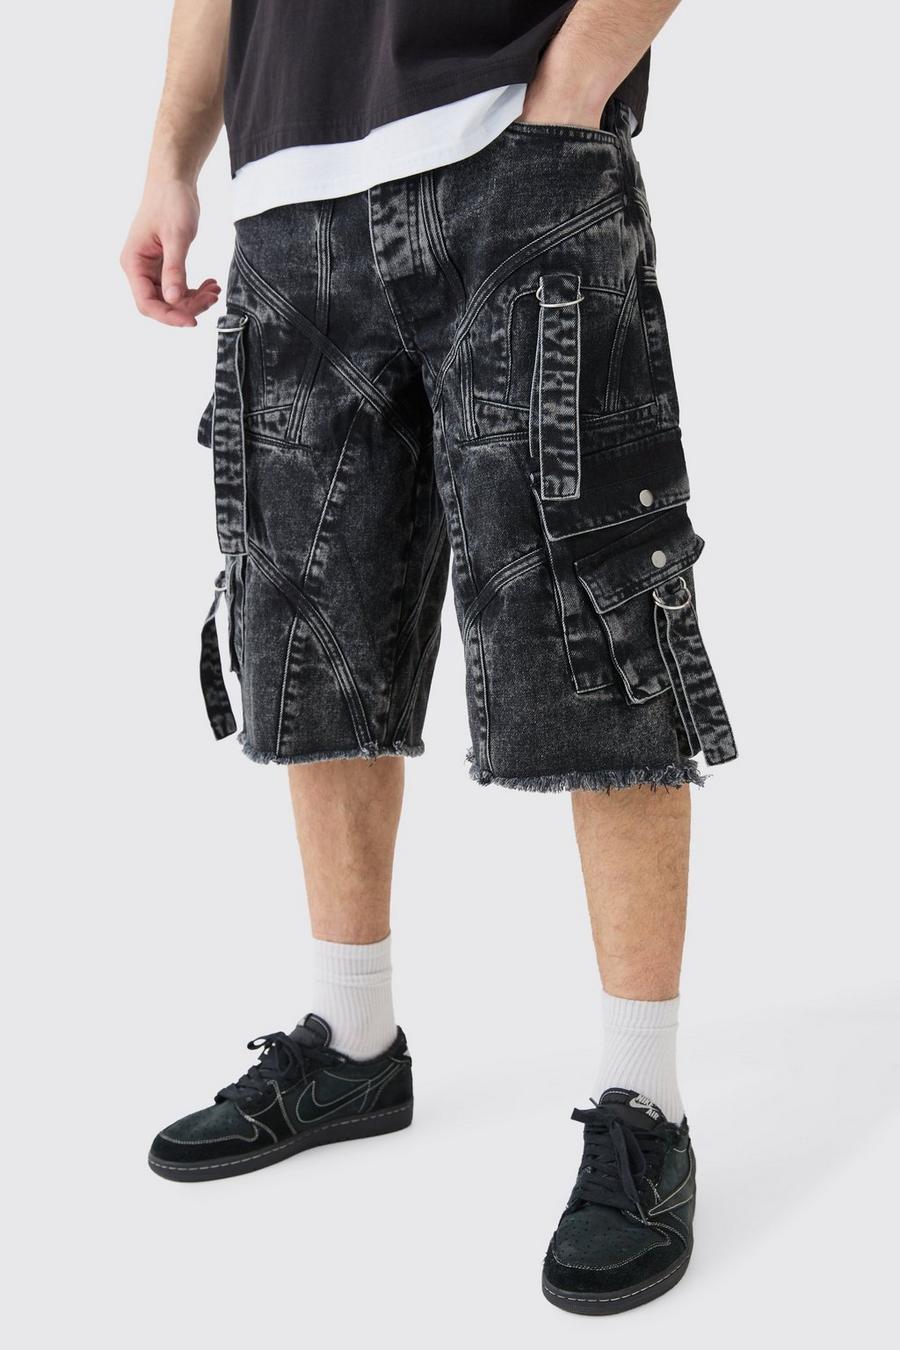 Washed black Tall Oversized Strap And Buckle Detail Denim Jorts